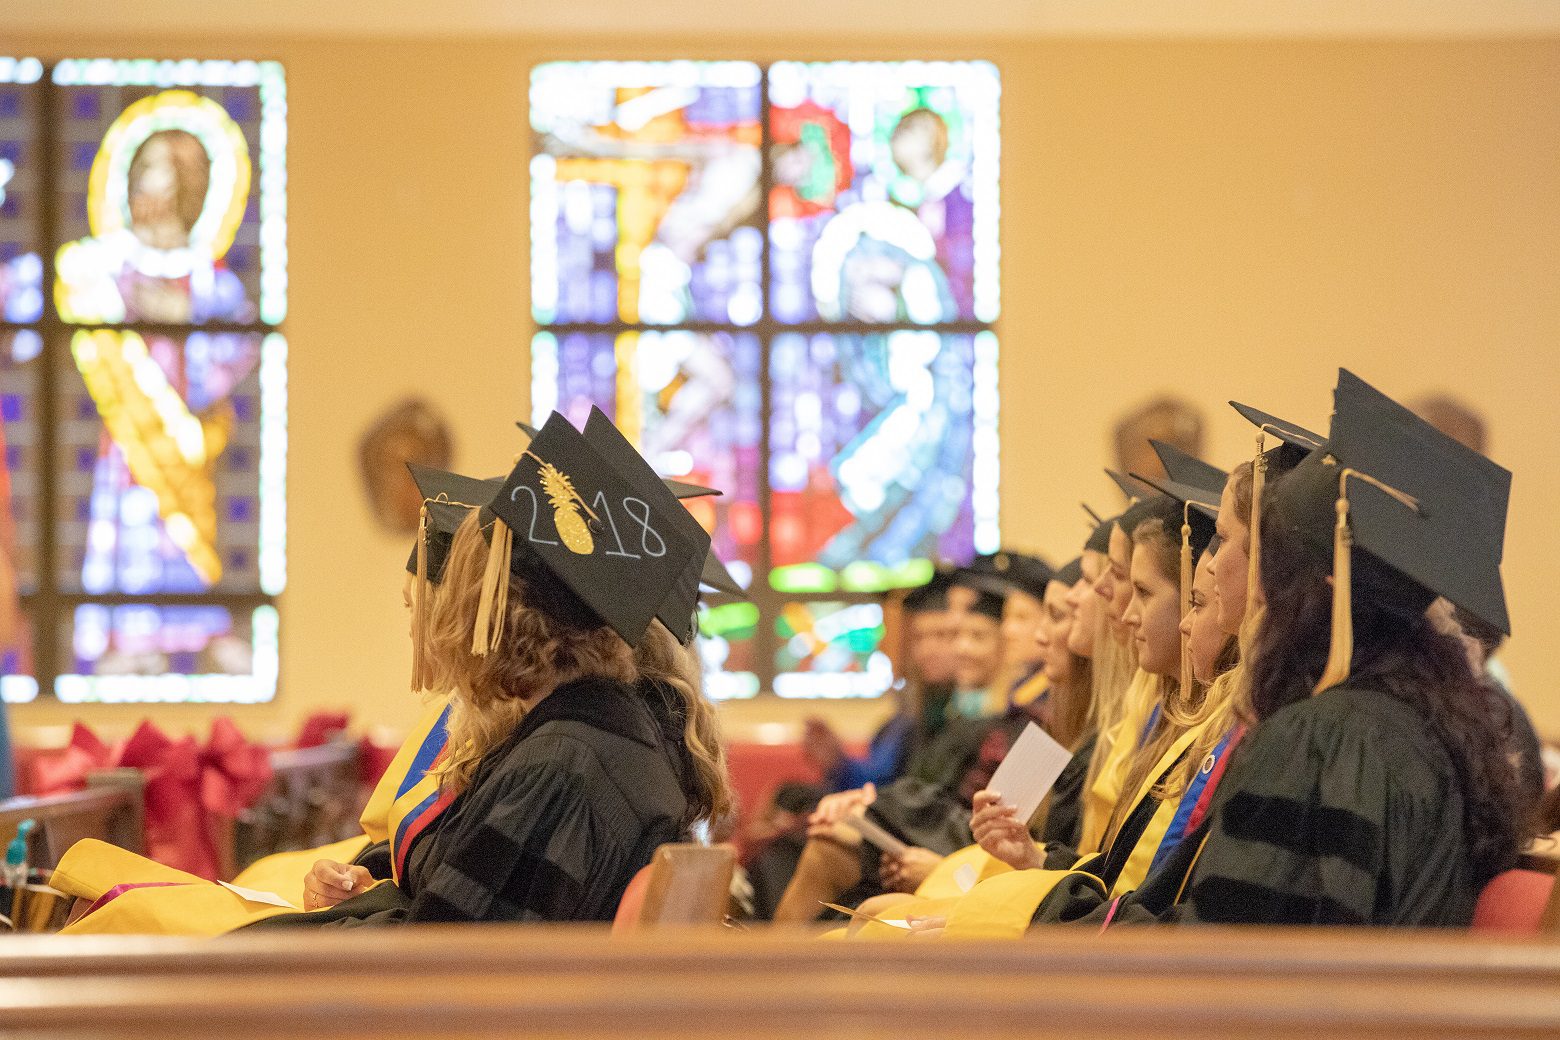 Inaugural Commencement Ceremony was Held for Gannon University’s Ruskin